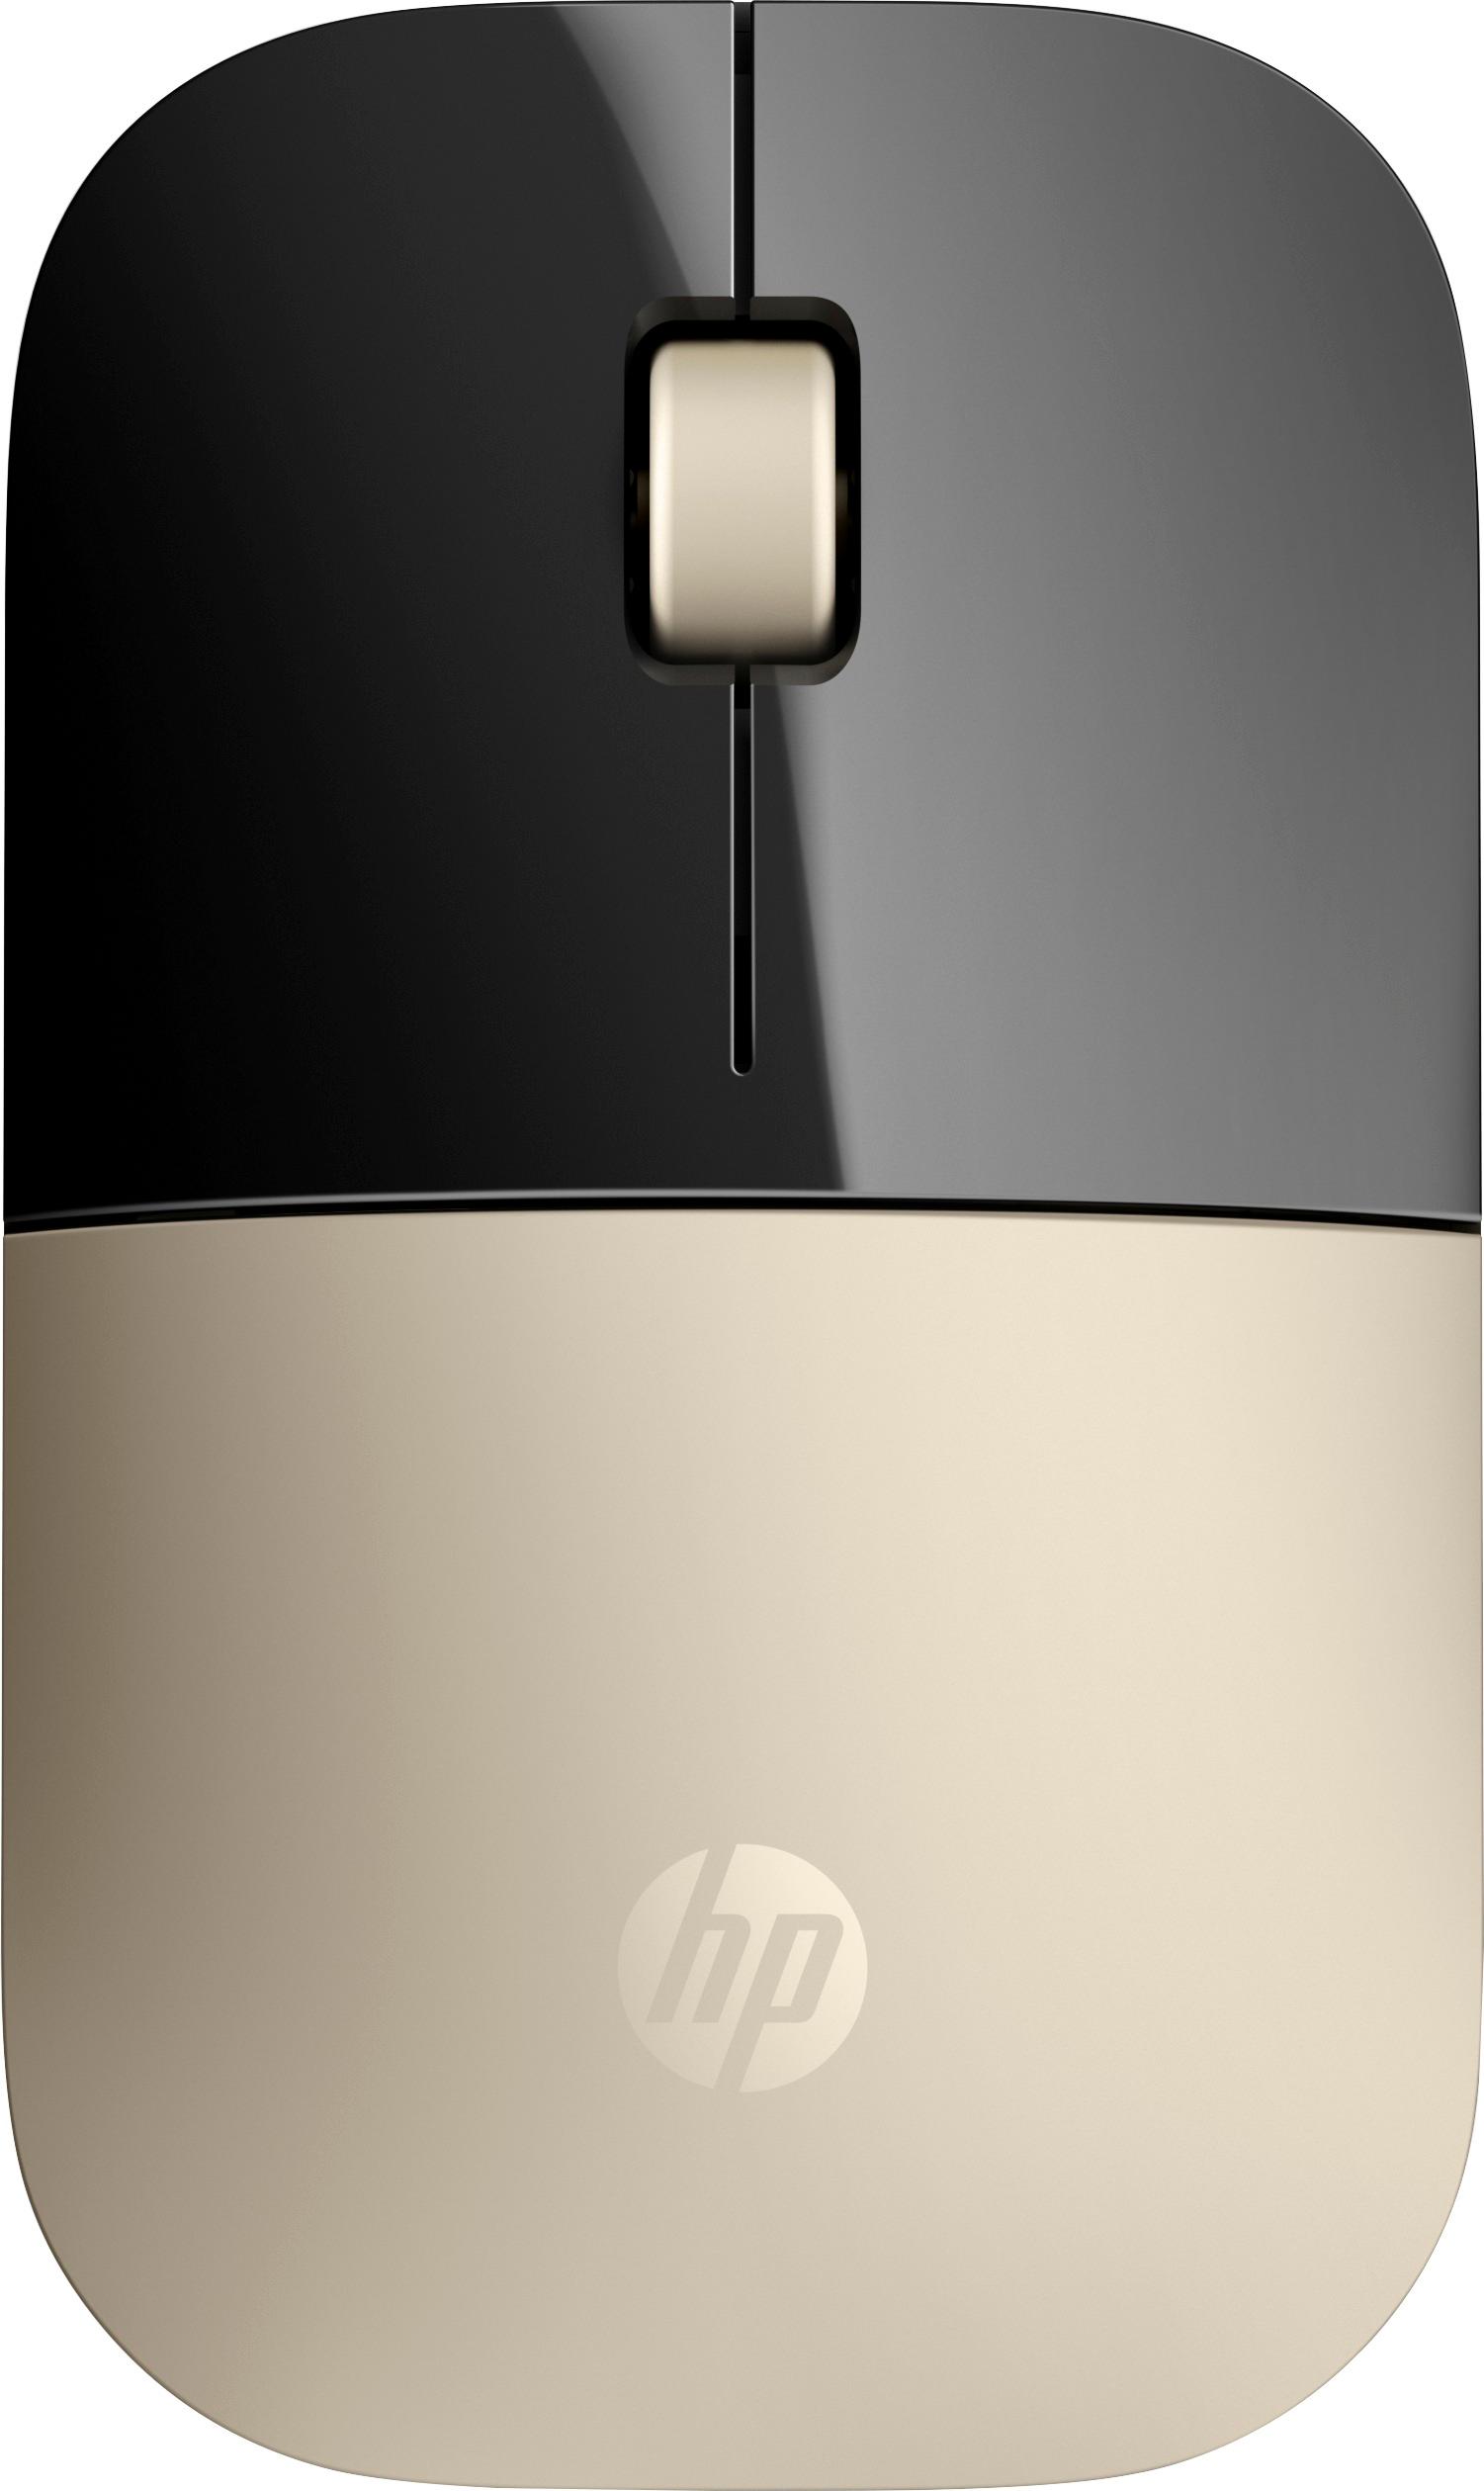 HP Z3700 Wireless Blue LED Mouse Gold X7Q43AA#ABL Z3700 - Best Buy | Funkmäuse